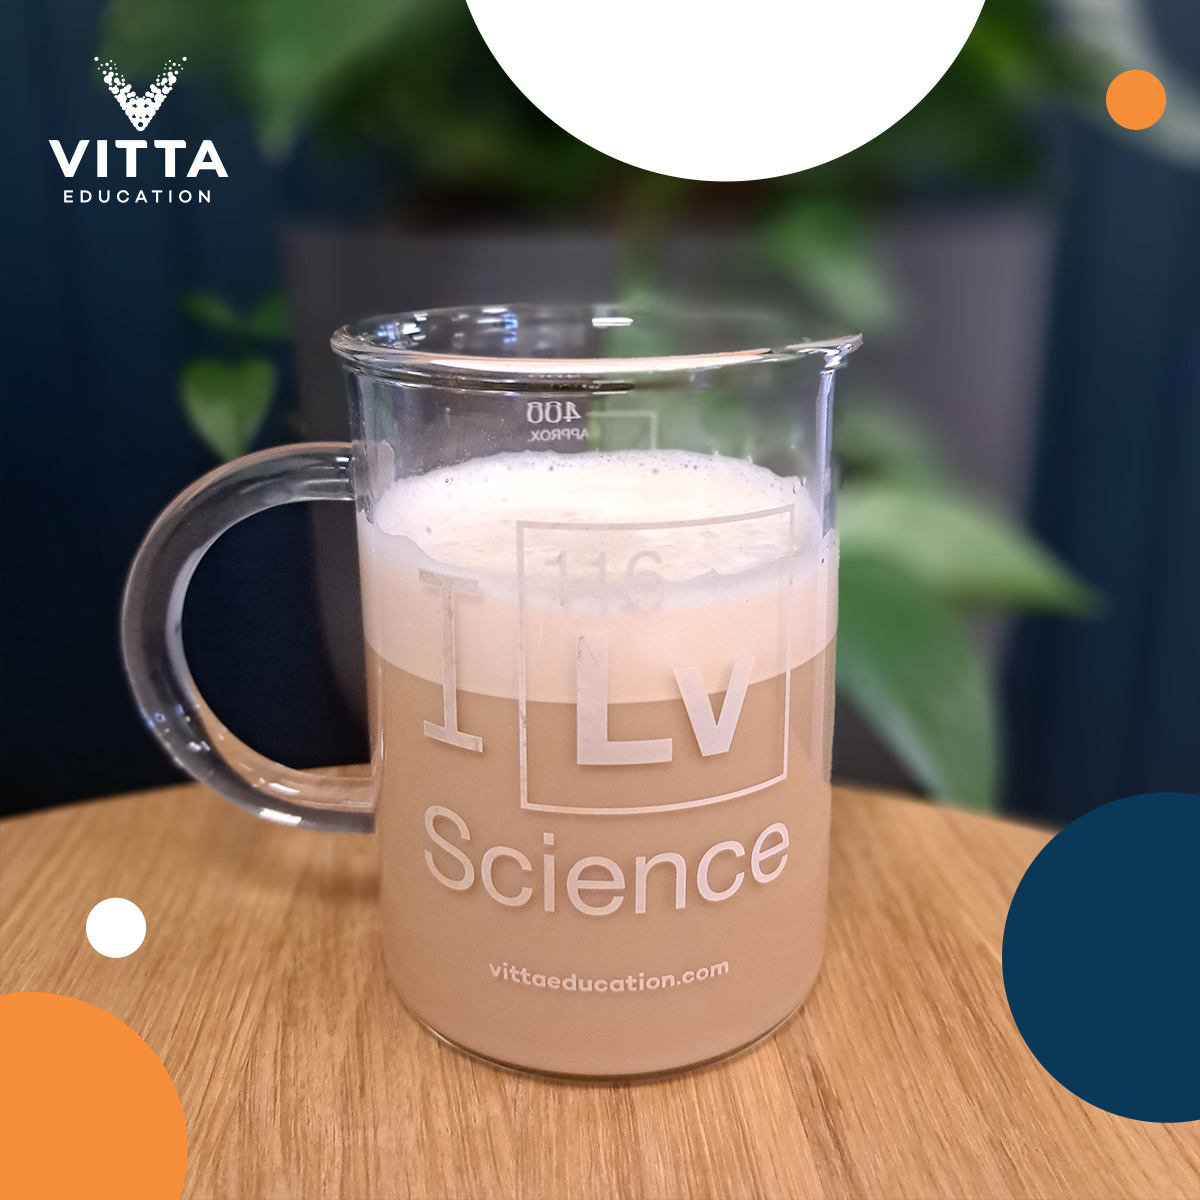 📢 I ❤️ Science Competition!  

We're giving you the chance to WIN an 'I Lv Science' Beaker Mug!

To enter:
🎉 Follow us 
🎉 #RT this tweet  

Educational establishments only.
Ends: 23:59 on 02.06.24

#science #STEM #ScienceTwitter